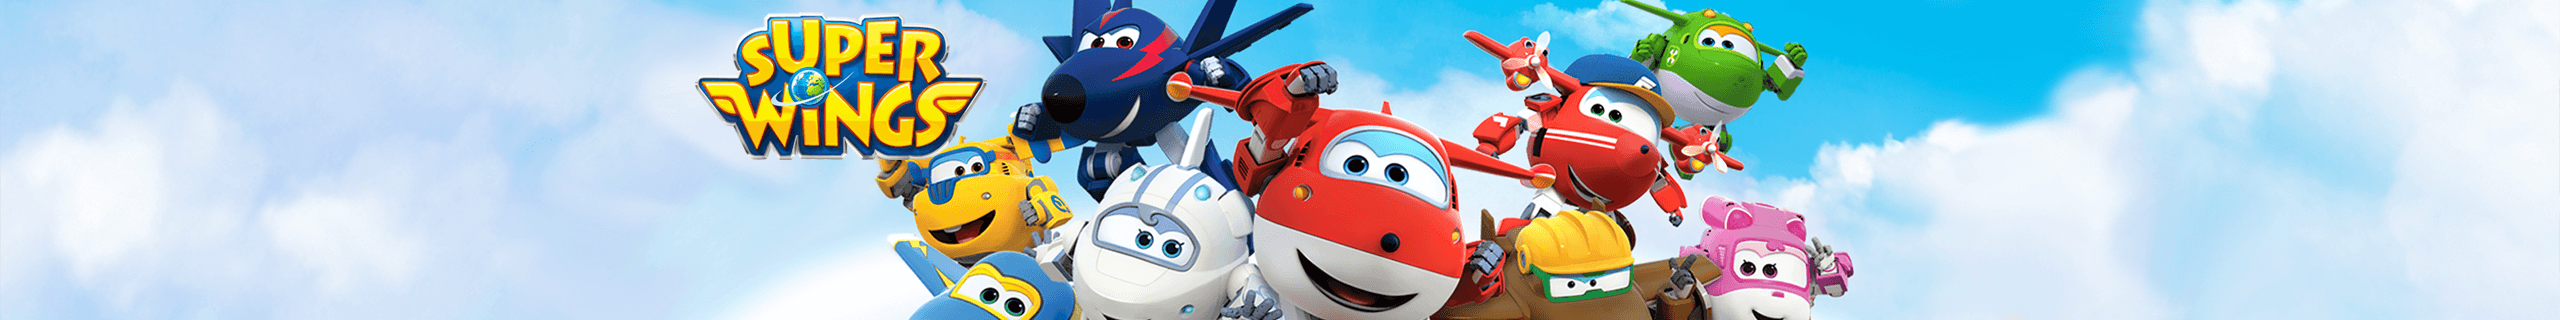 Super Wings Jett Transforming U  Toys”R”Us China Official Website